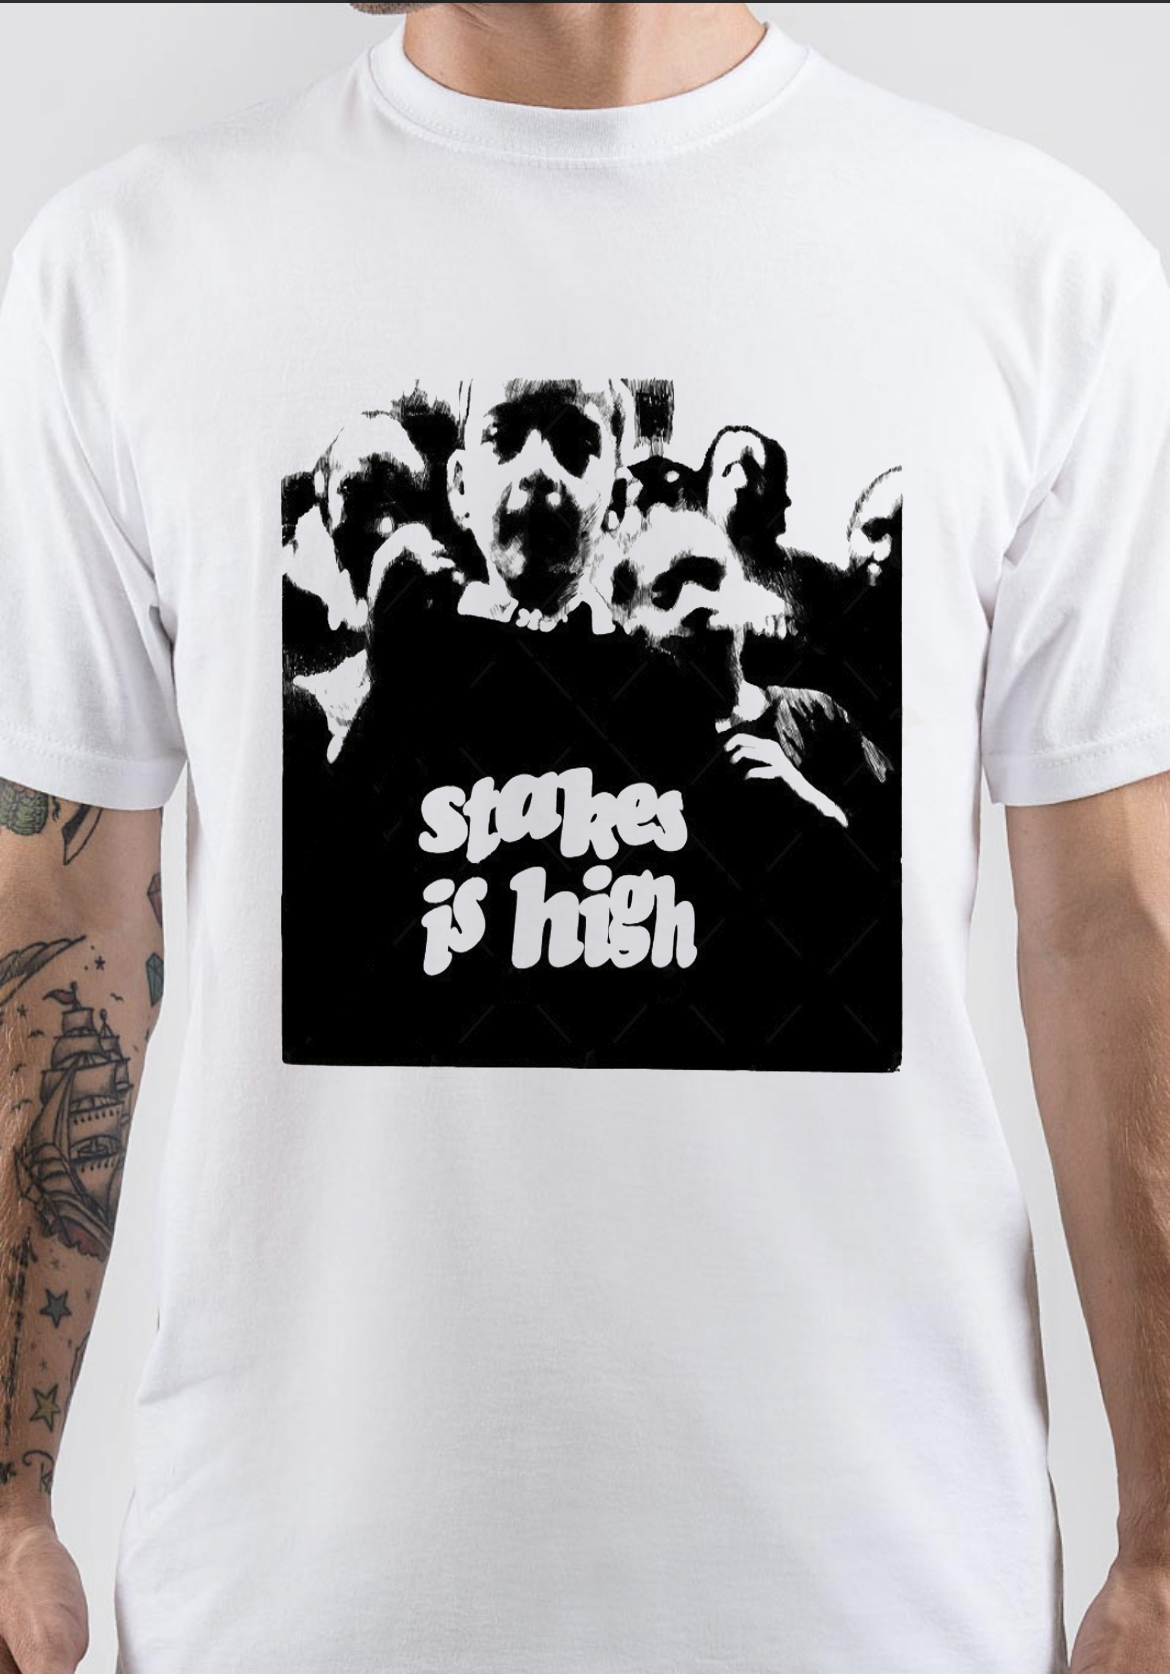 Stakes Is High T-Shirt And Merchandise